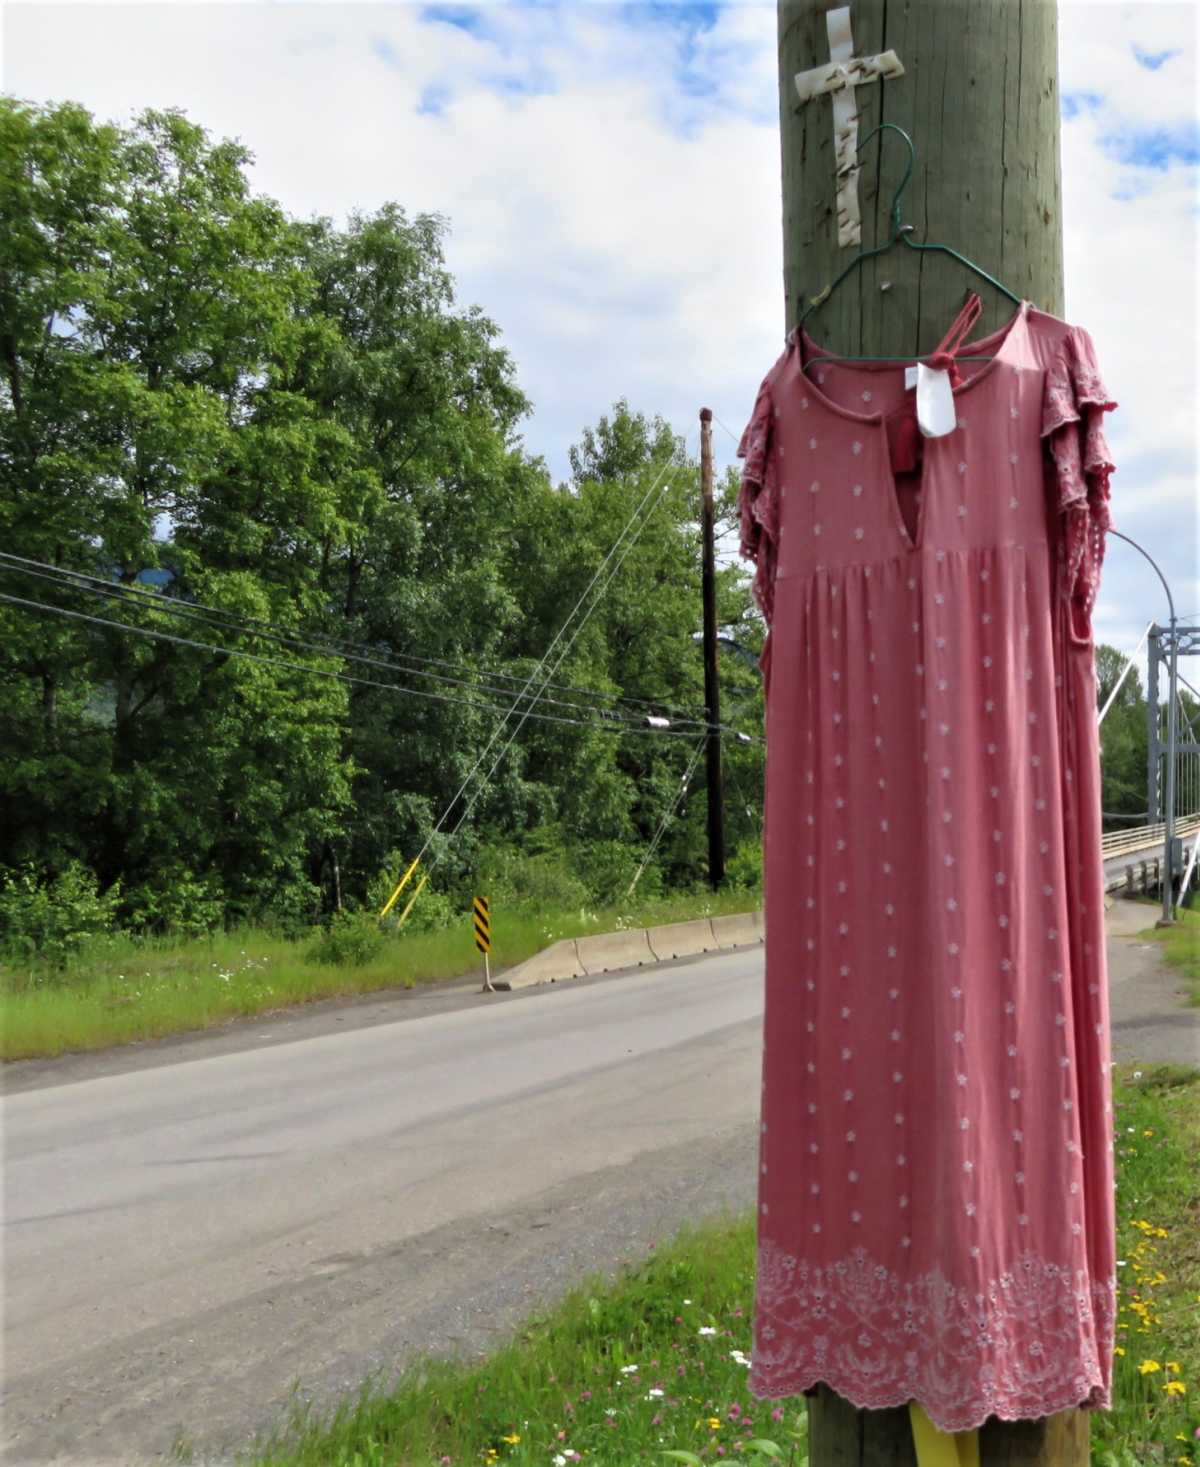 Red dresses reminder of murdered, missing women